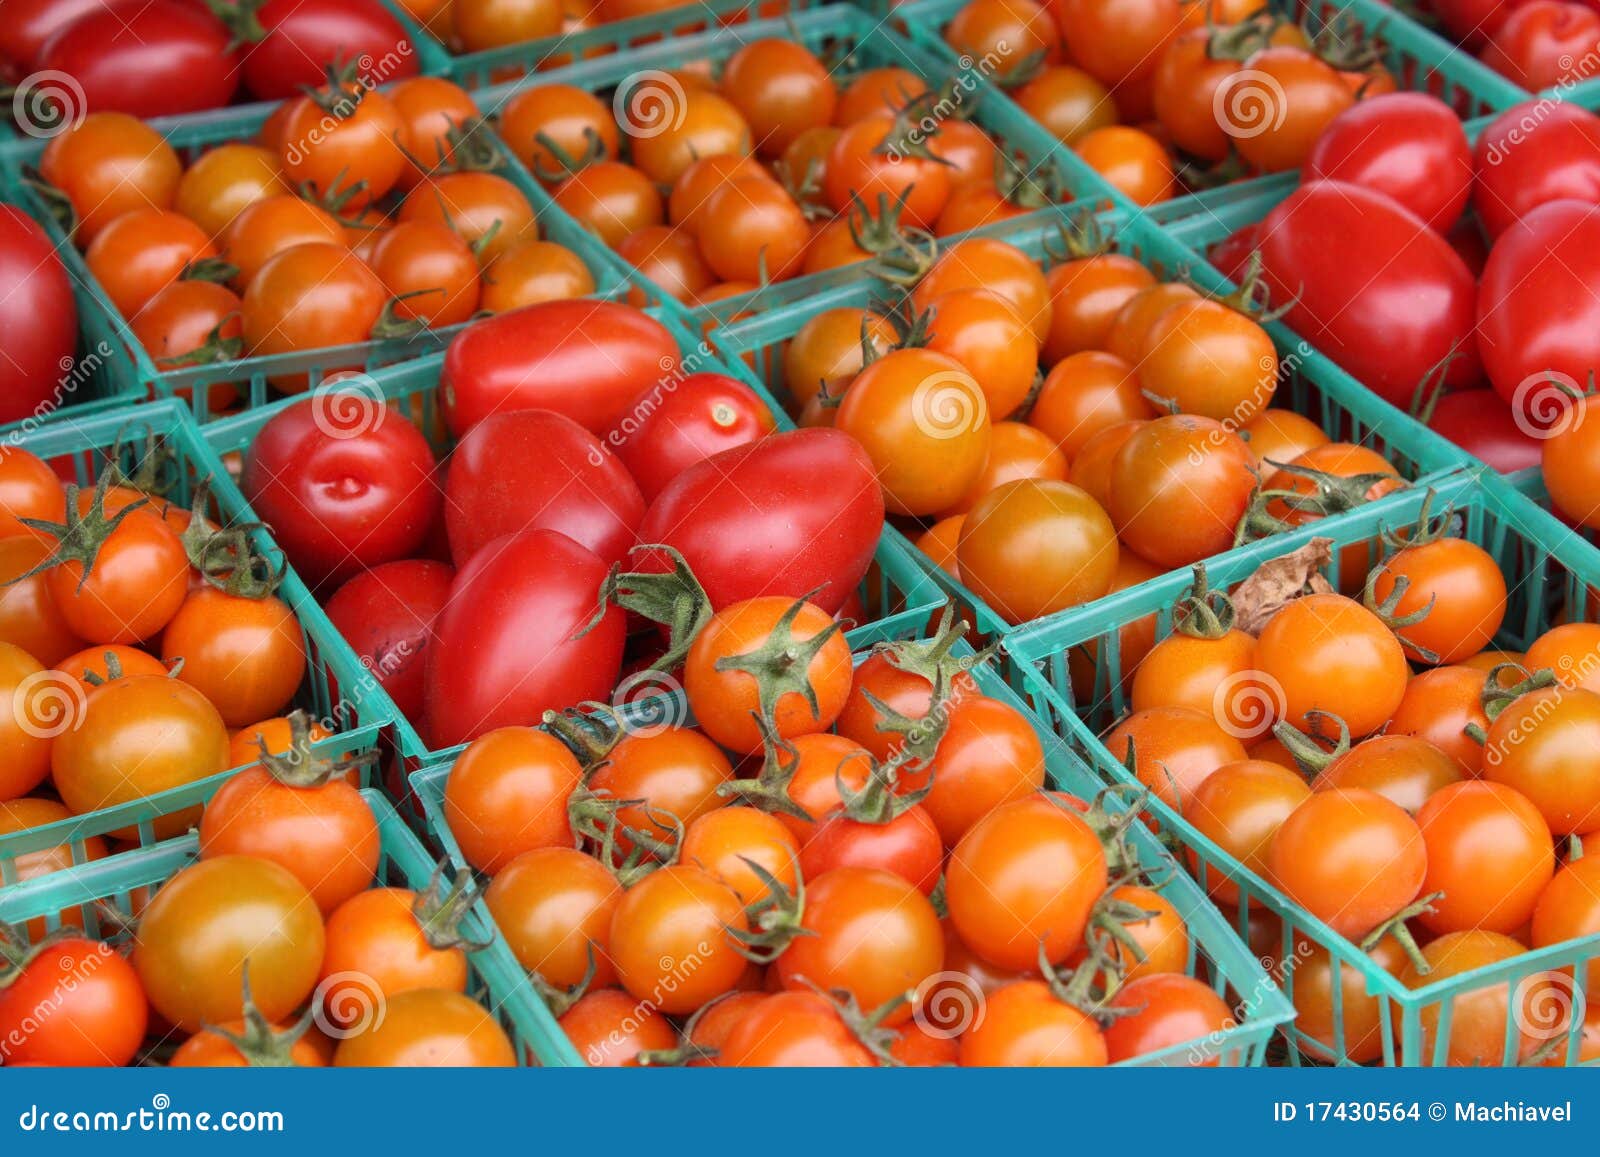 Tomatoes, orange and red stock photo. Image of natural - 17430564